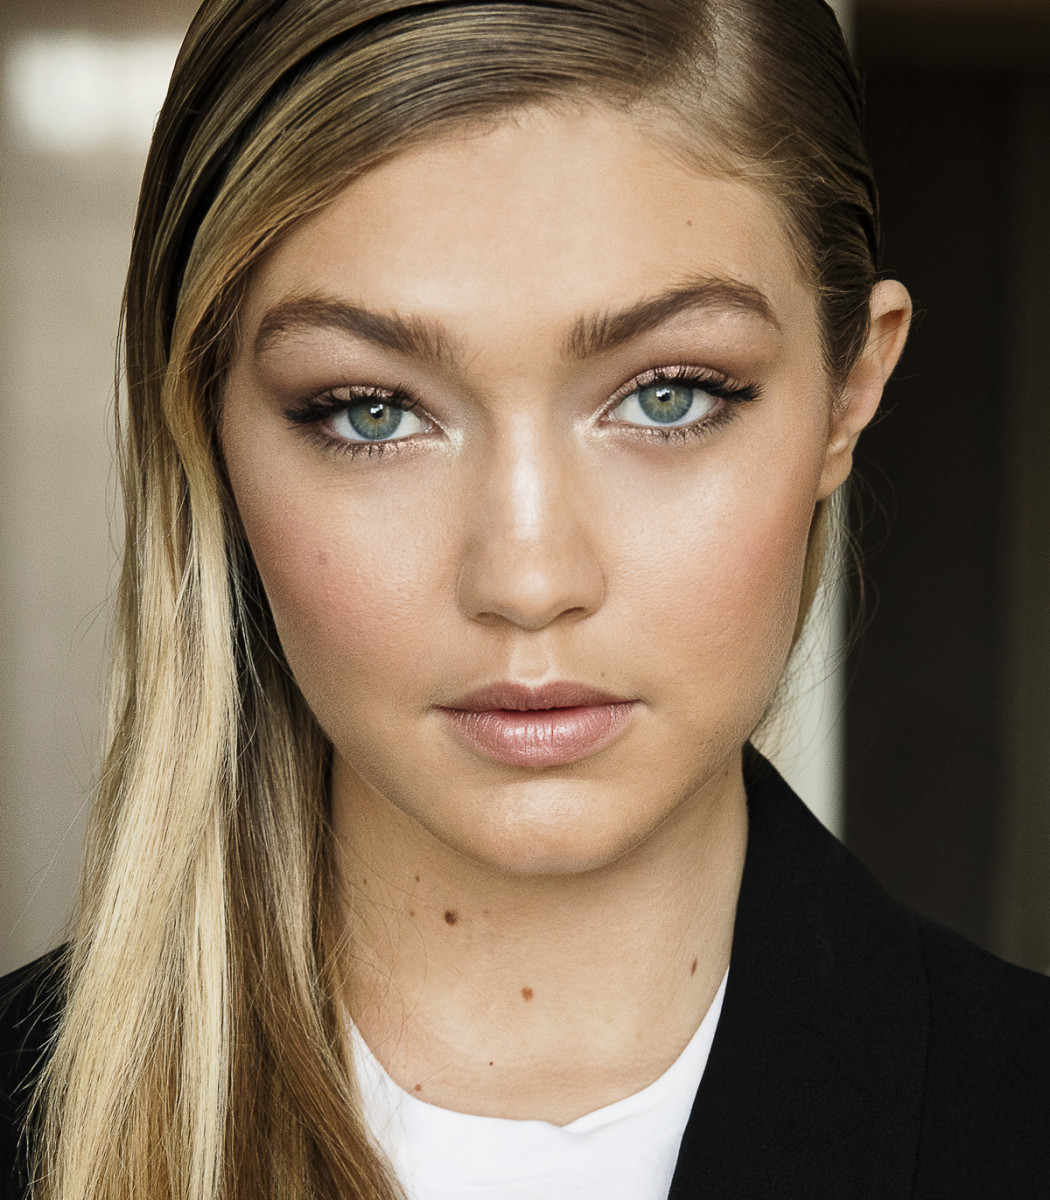 GIGI HADID: THIS IS THE OPPOSITE OF MAKEUP THAT MAKES YOU LOOK OLDER ...